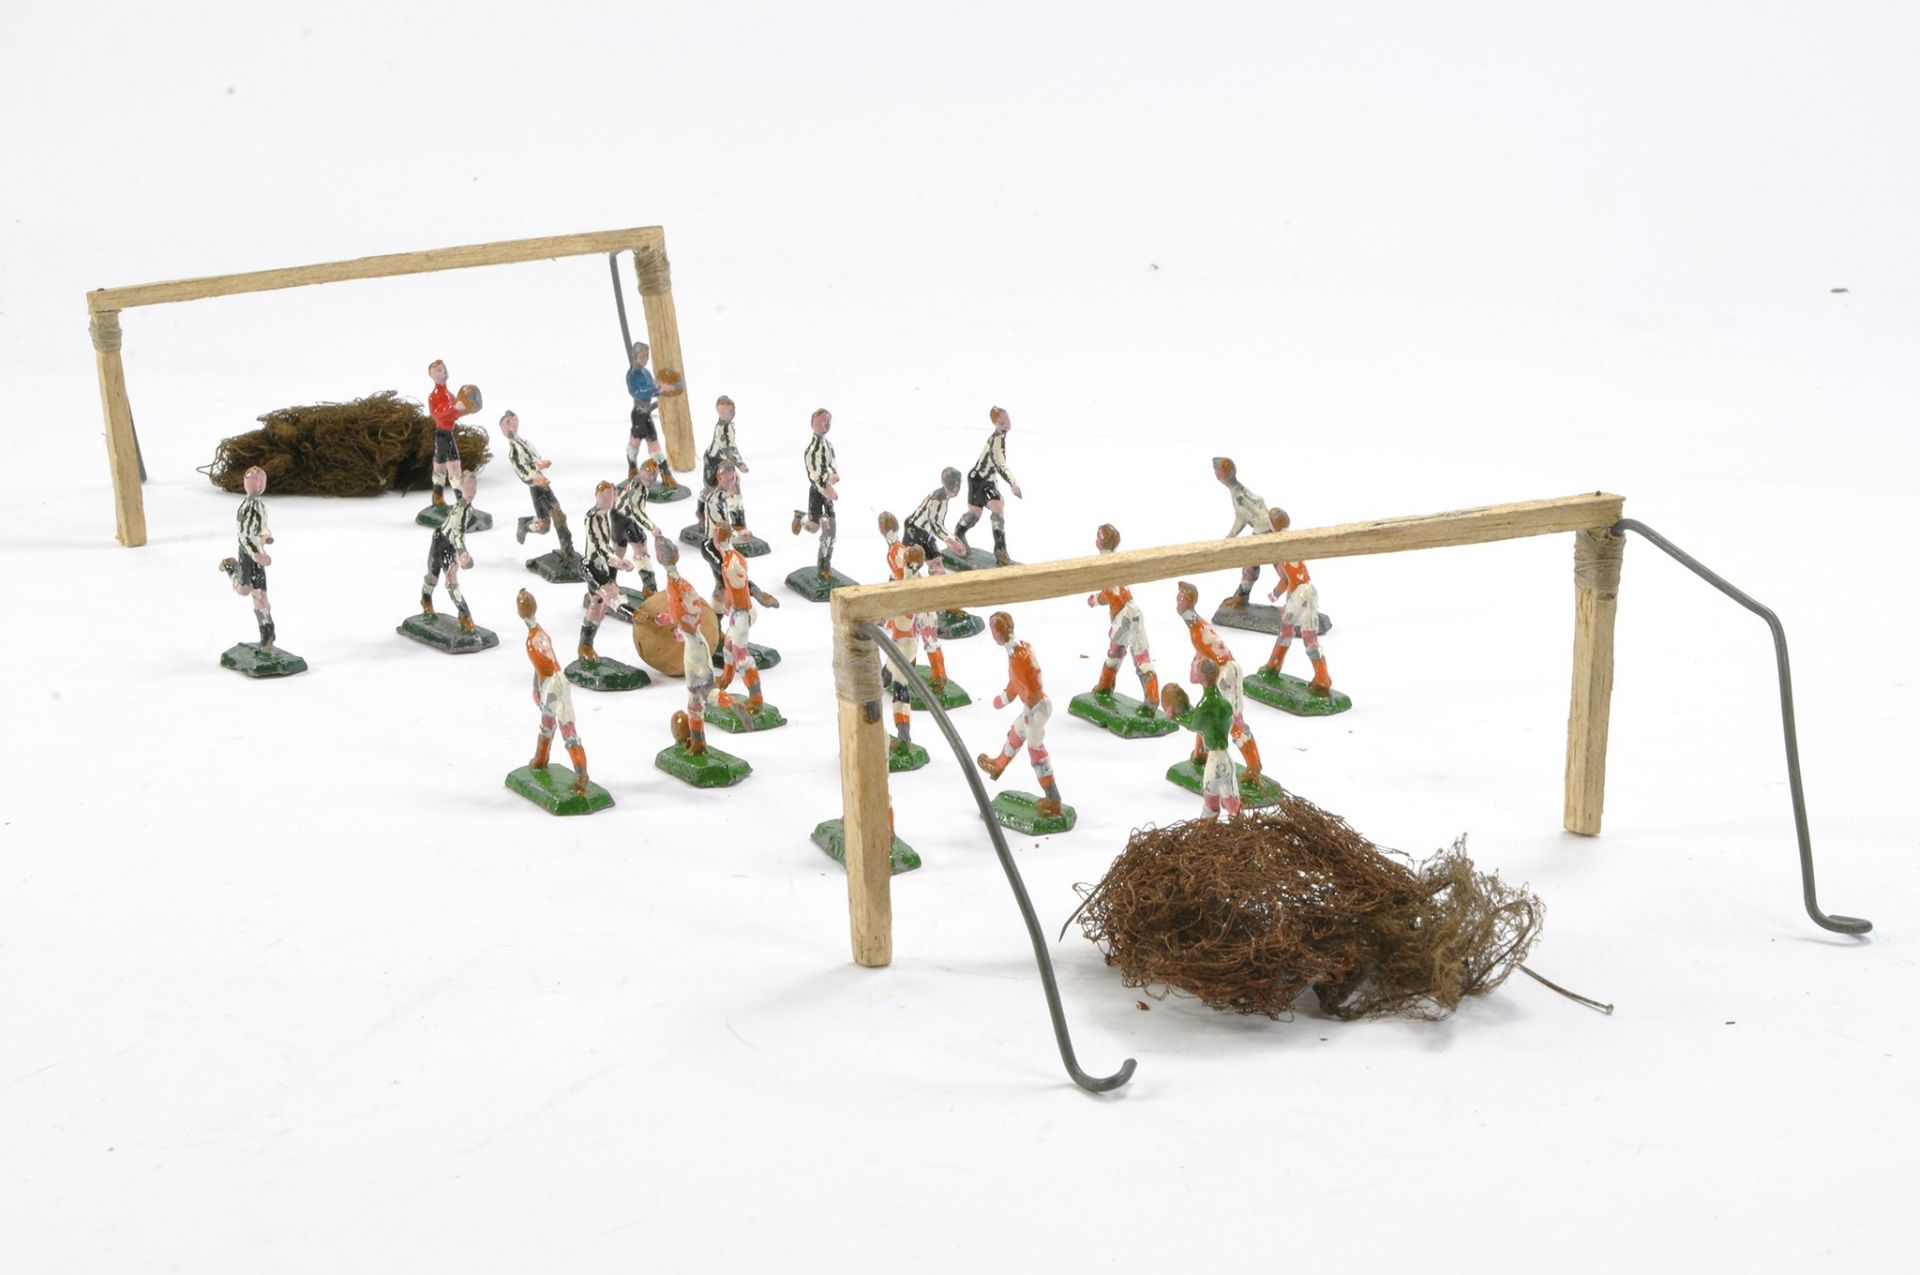 Unusual Lead Metal Football - Soccer Figures likely from a vintage game as shown. Maker unknown. - Image 2 of 3